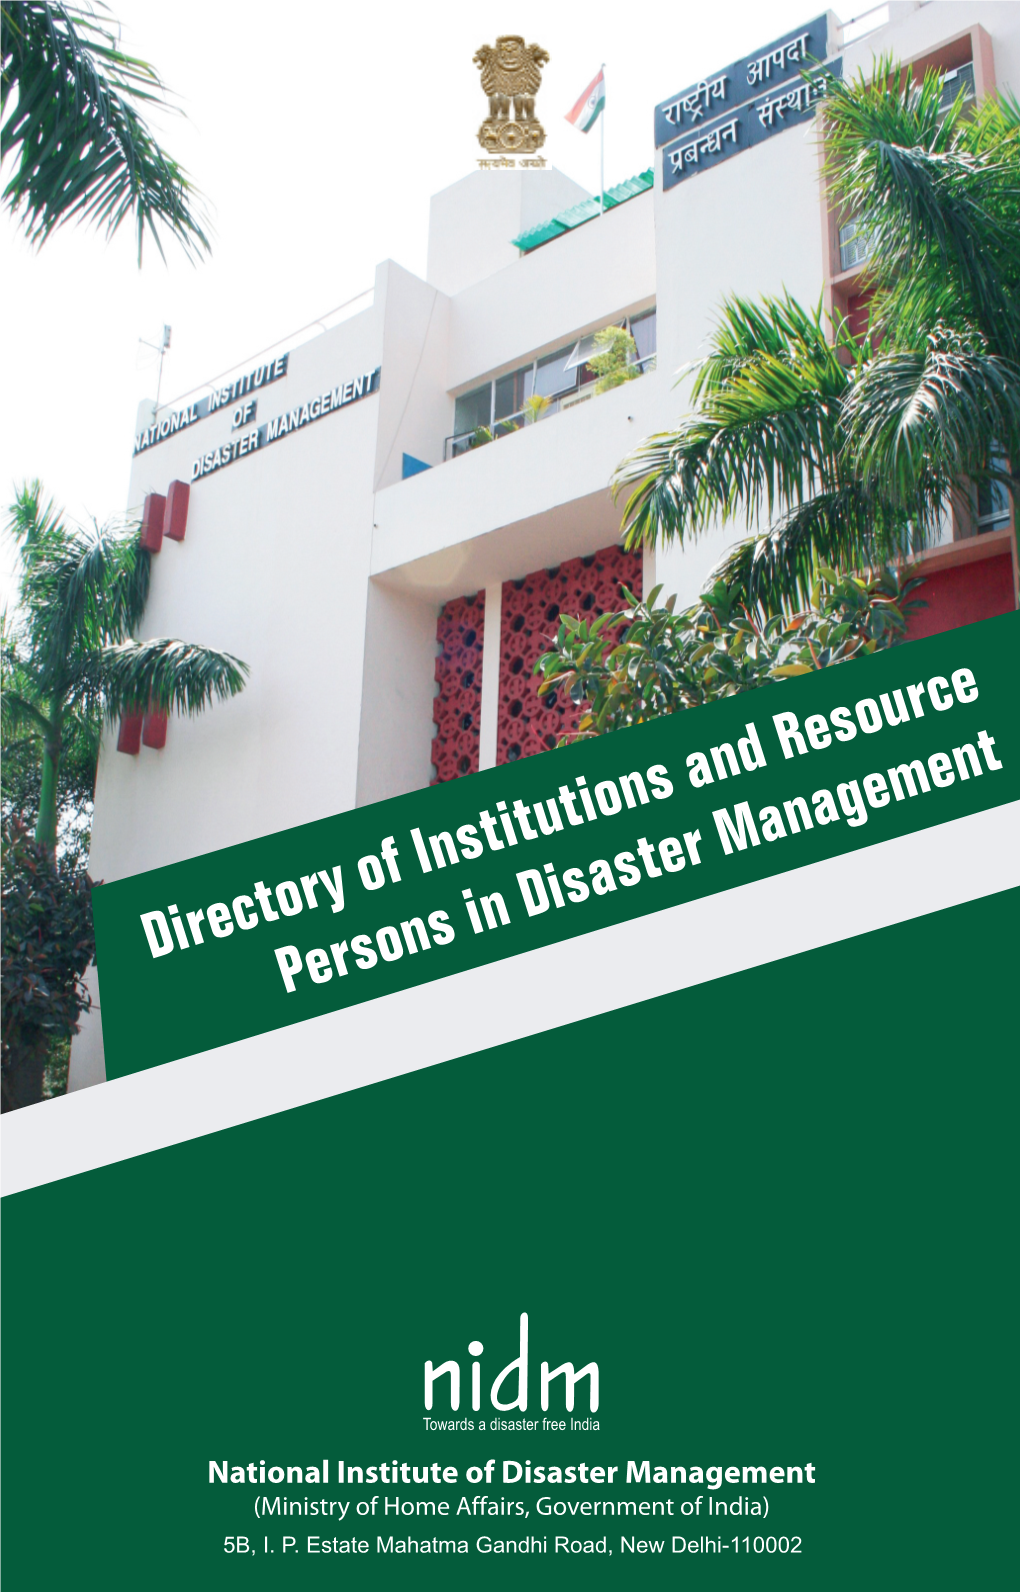 Directory of Institutions and Resource Persons in Disaster Management